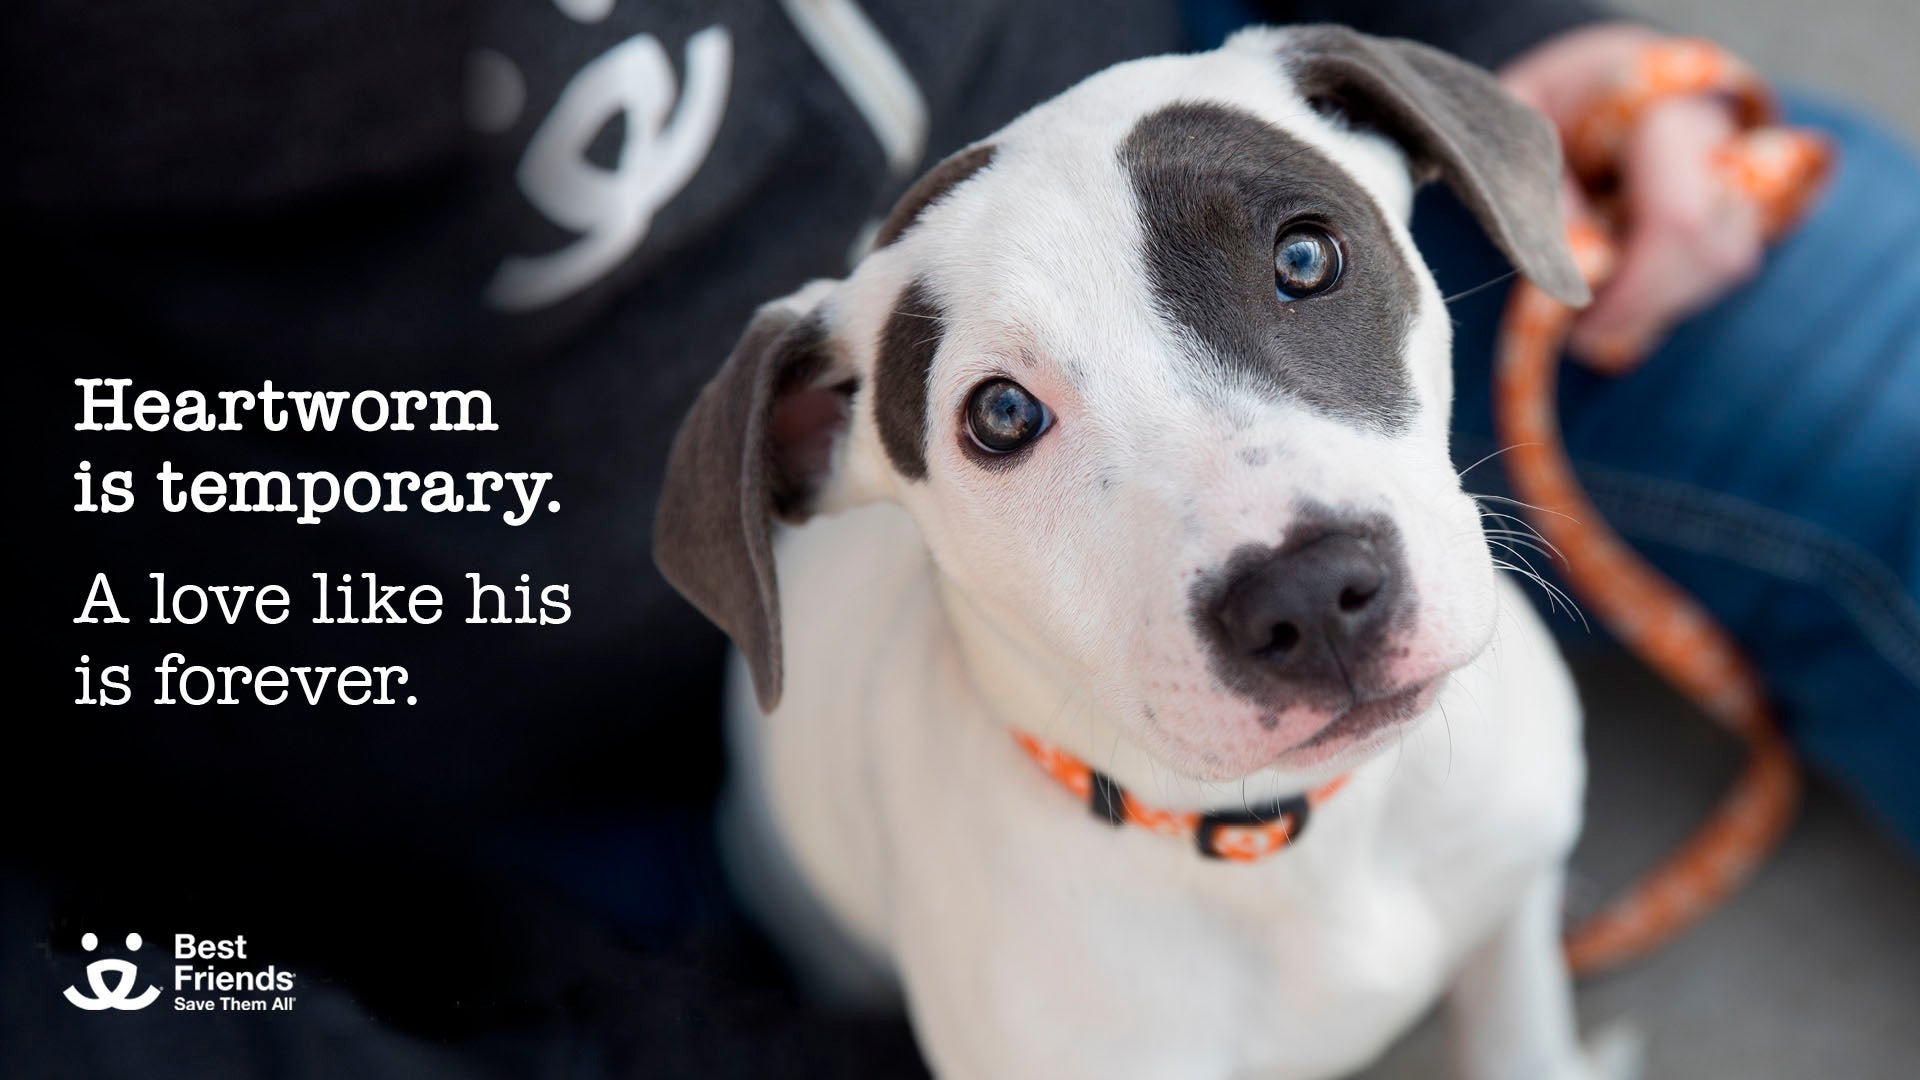 Photo of white and gray puppy with text: Heartworm is temporary. A love like his is forever.